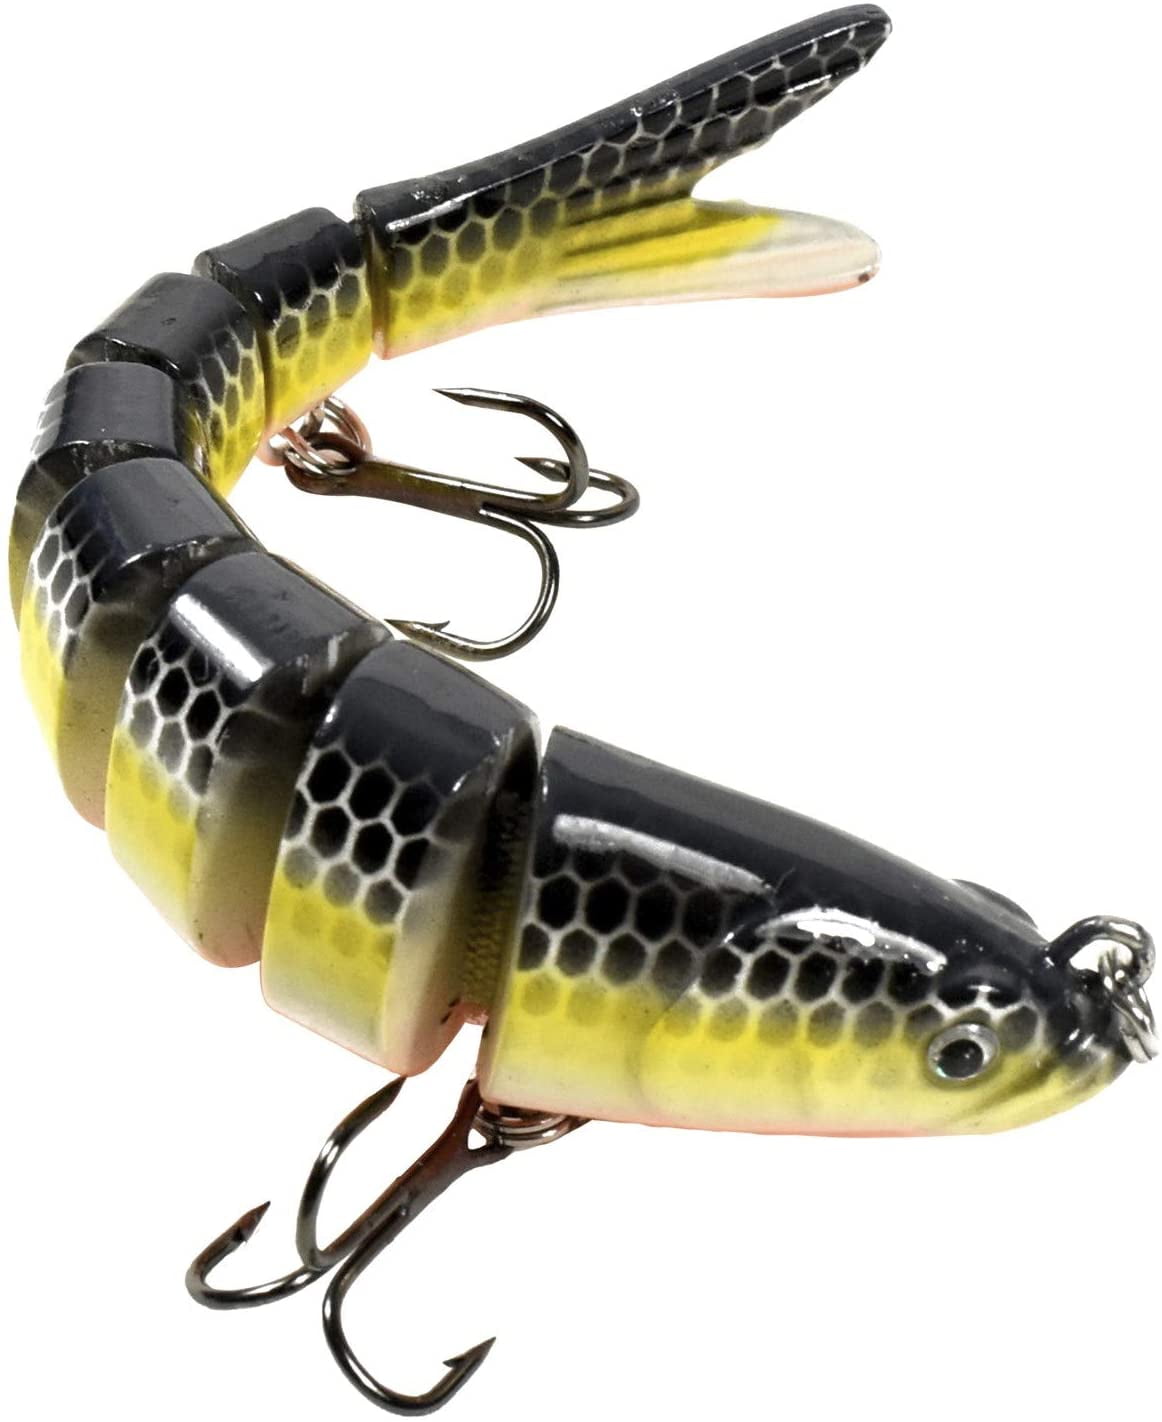 HQRP 3.9 Fishing Lure 0.4oz Freshwater Saltwater Lakes Fish Bait Jointed  Multi-Section Slow Sinking Glide